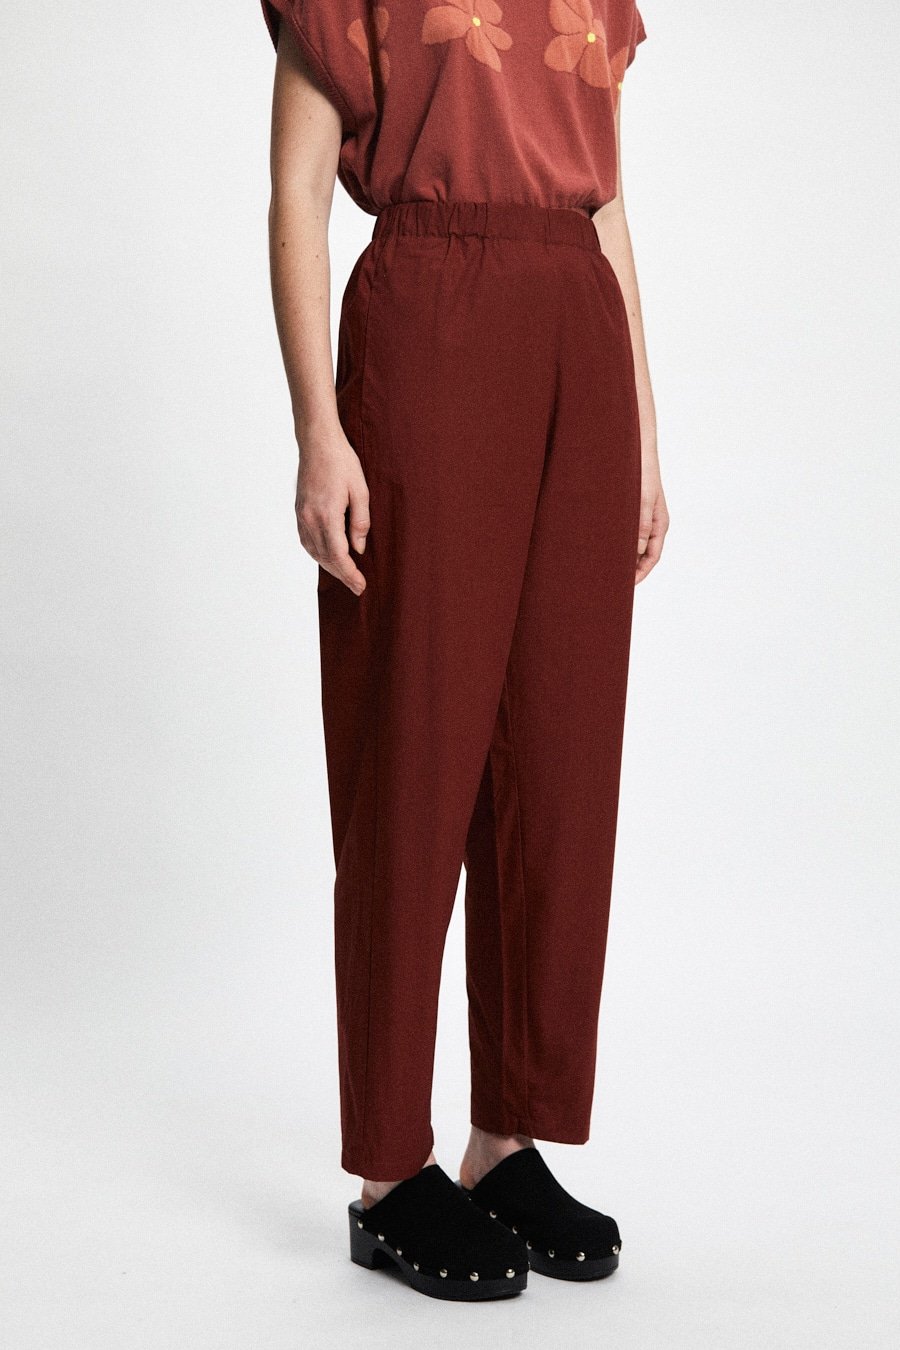 Rita Row relaxed fit high waist Bang pant rust | Pipe and Row Seattle